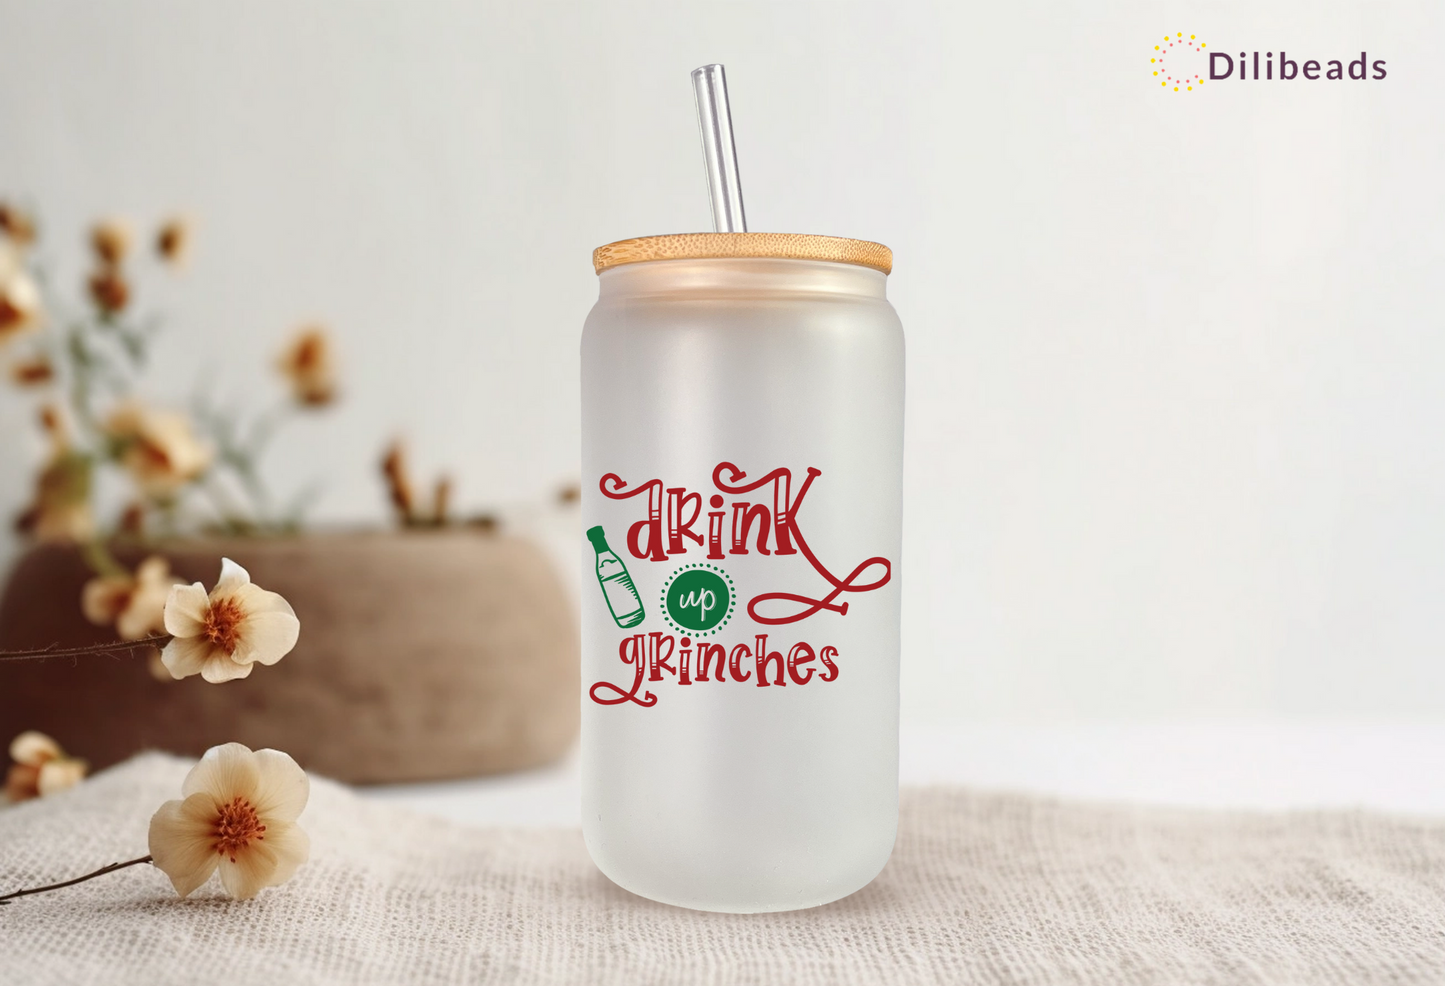 Drink up Grinches Glass Tumbler - Festive Christmas Gift - Holiday Drinkware - Funny Quote - 16oz Christmas Tumbler - Gift for Friends and Family